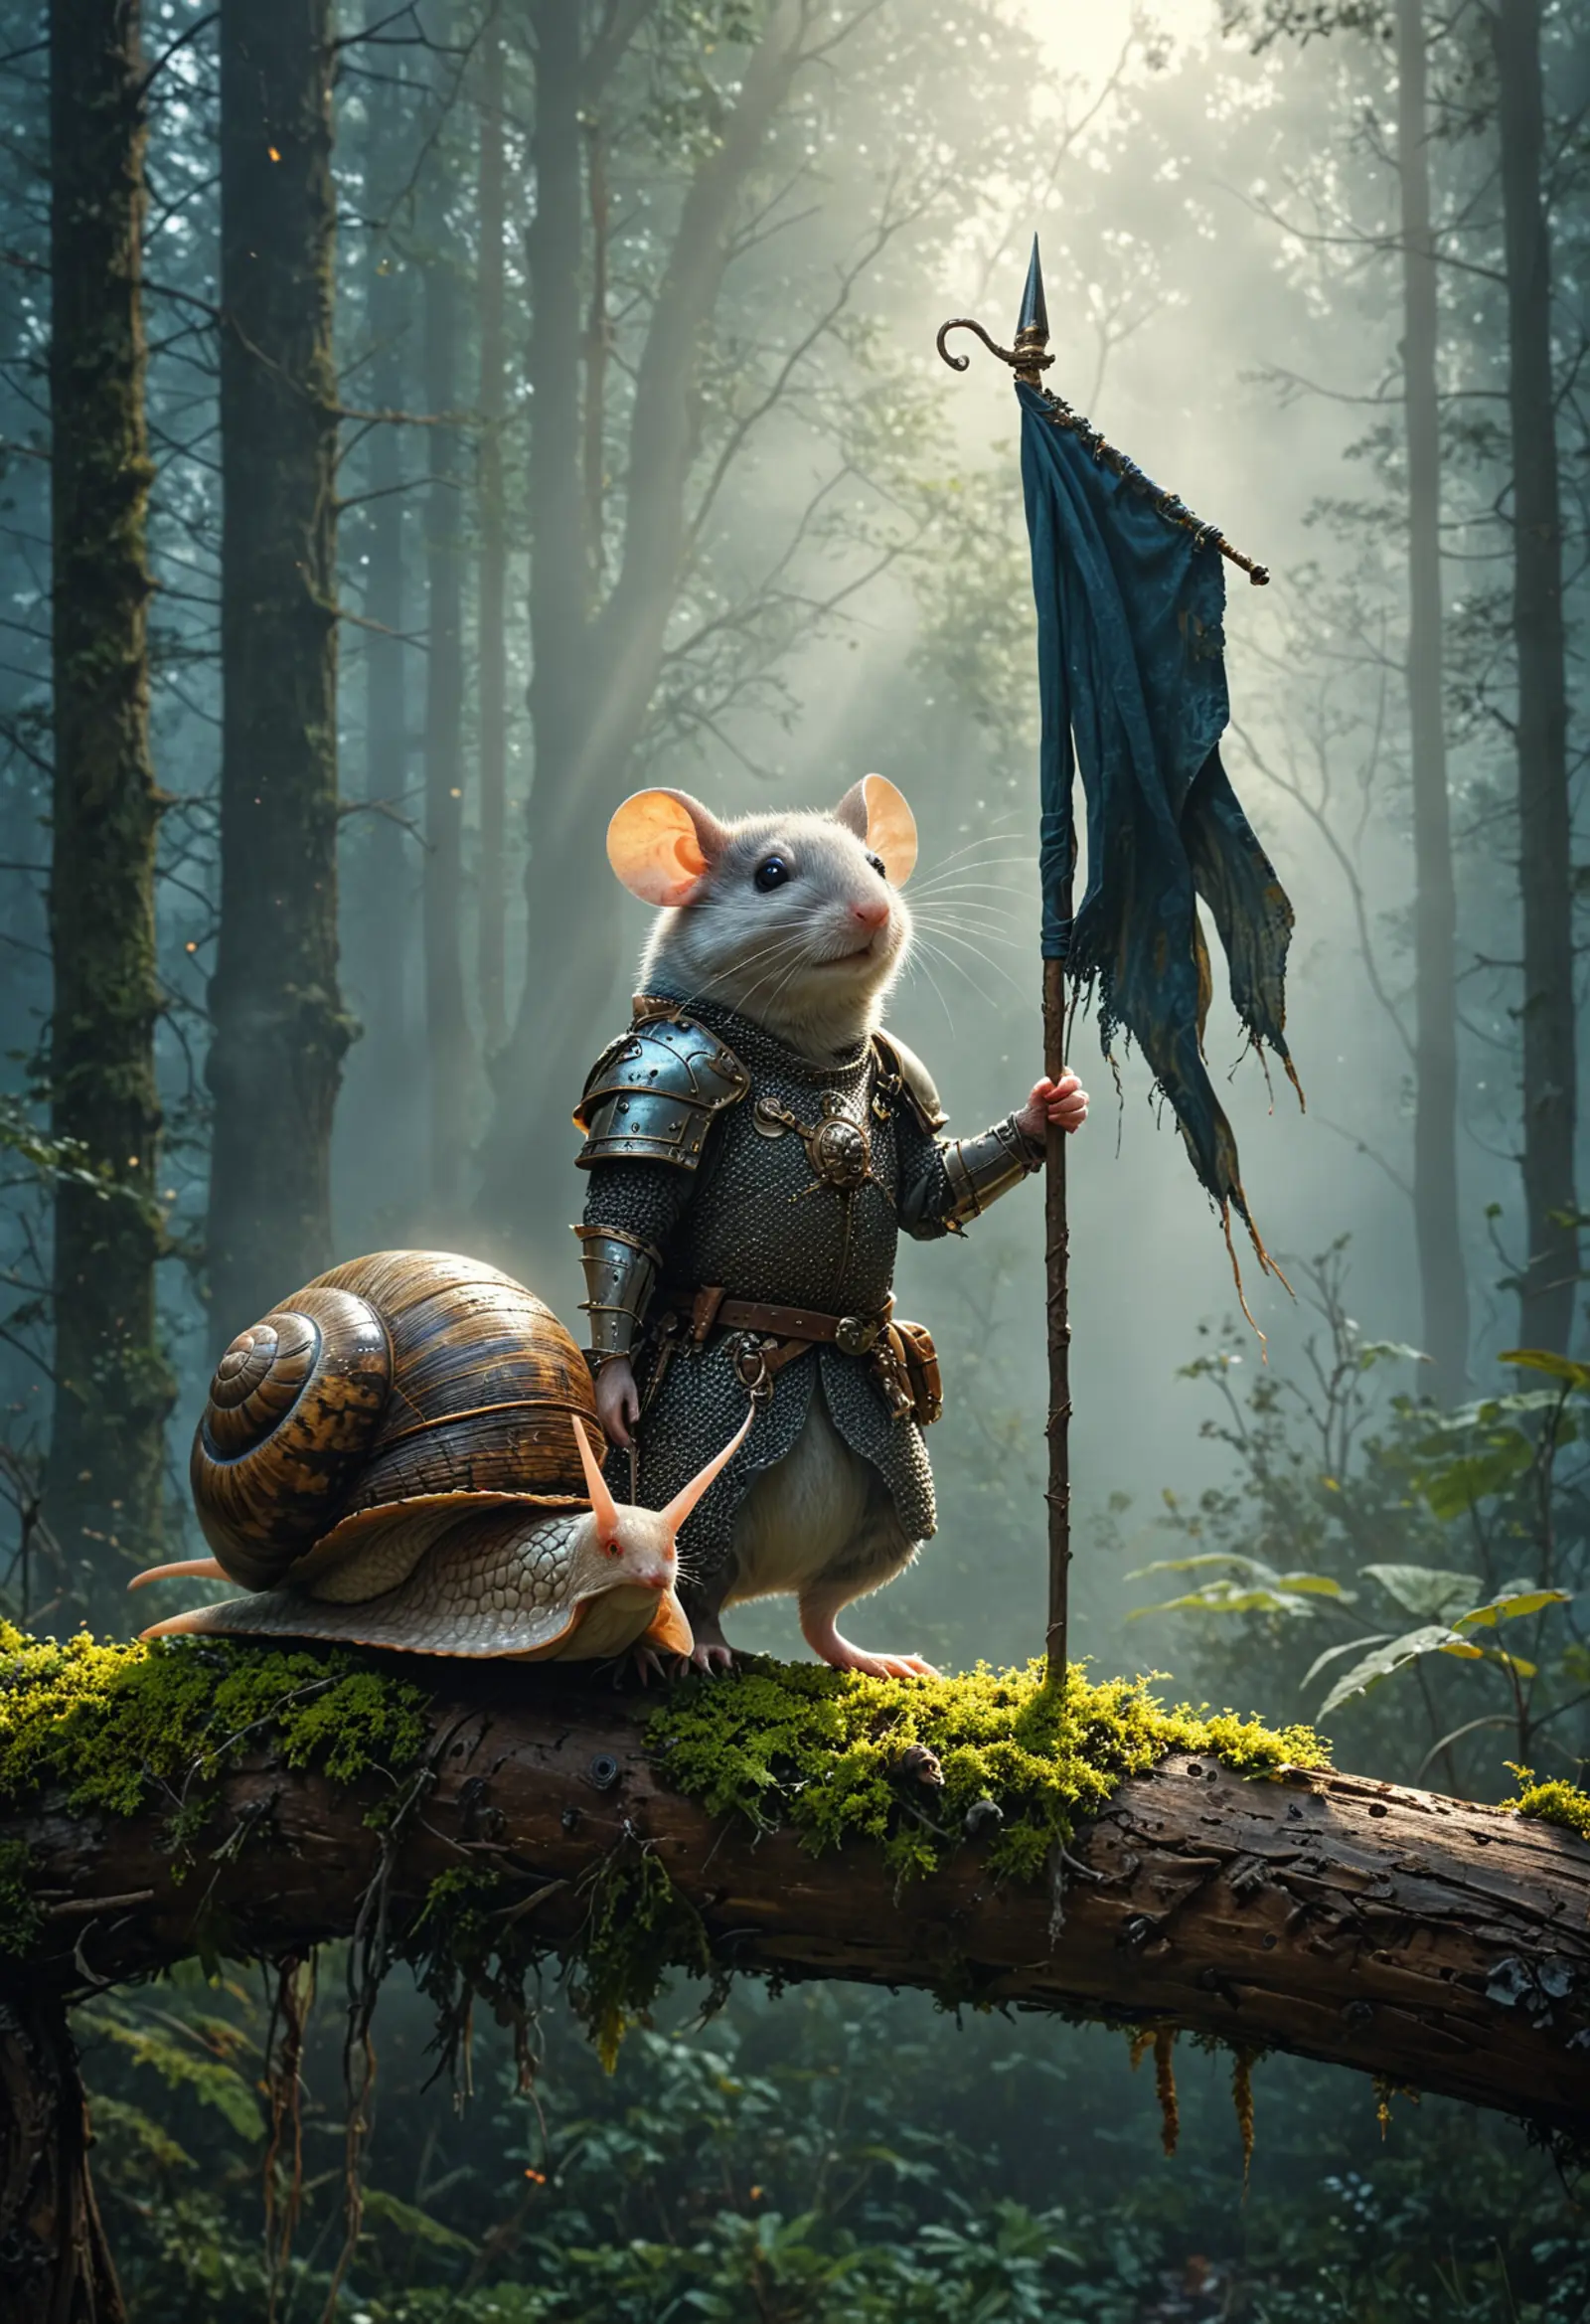 A mouse in medieval knight armor standing on a moss-covered branch in a forest setting. The mouse is holding a spear with a tattered blue flag, and beside it is a snail. The forest is dense with trees and the background is filled with soft sunlight filtering through the mist.